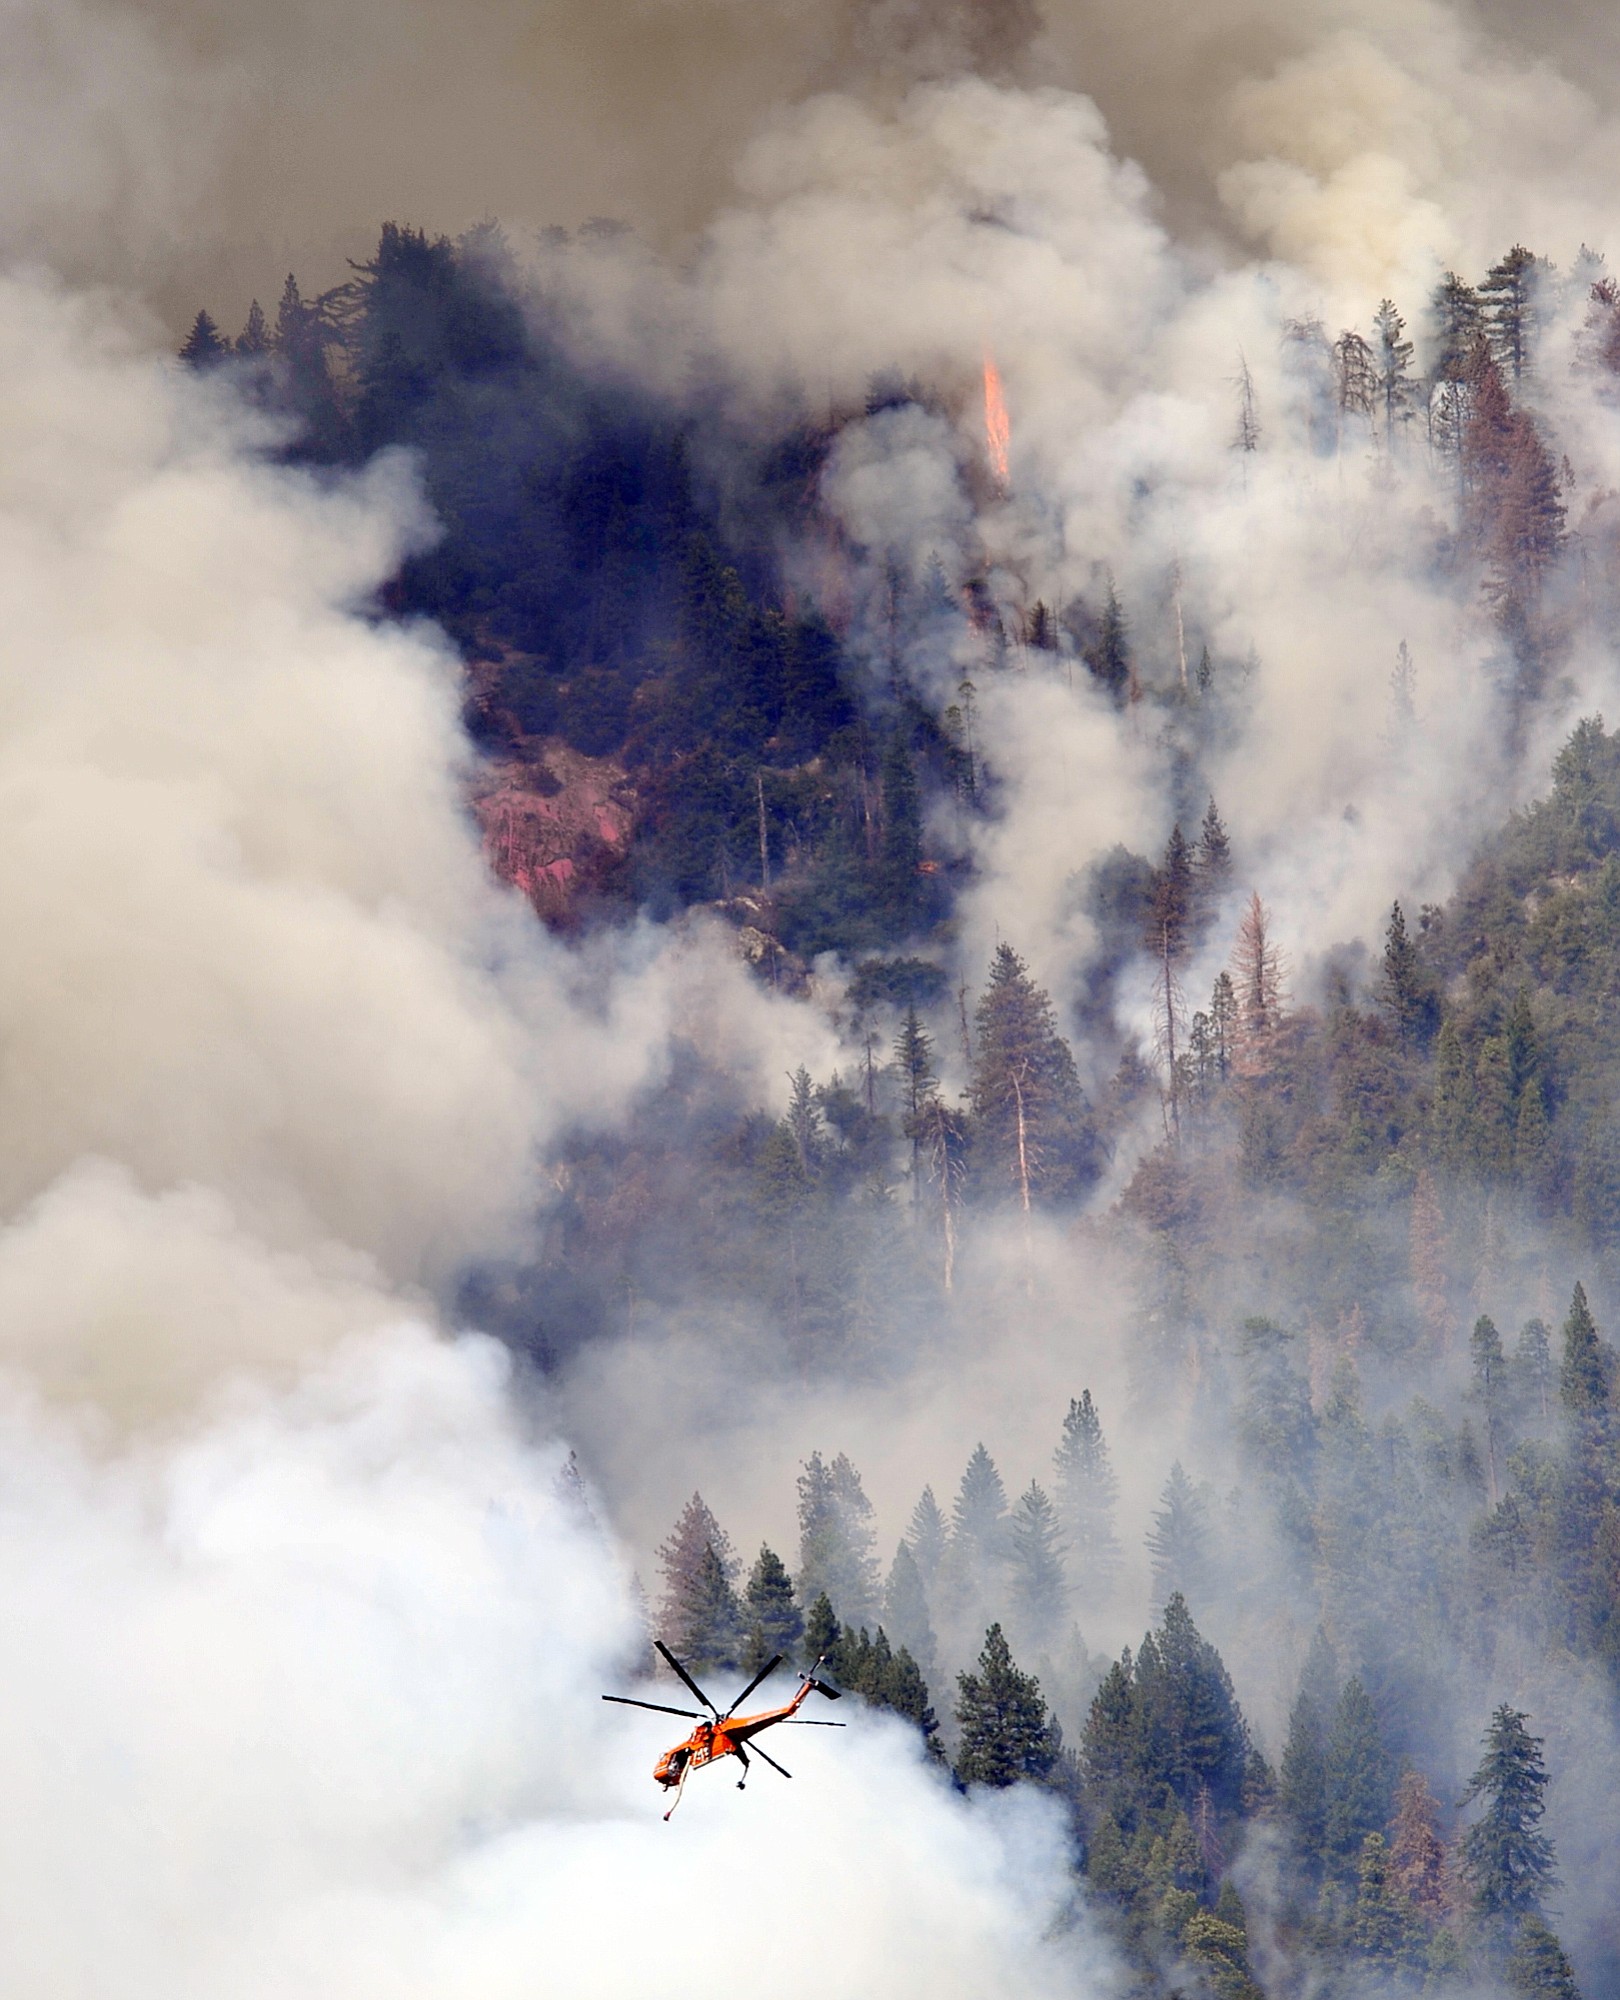 A helicopter flies over Willow Creek Canyon as a wildfire continues burning in the Sierra near Bass Lake, Calif., on Monday.